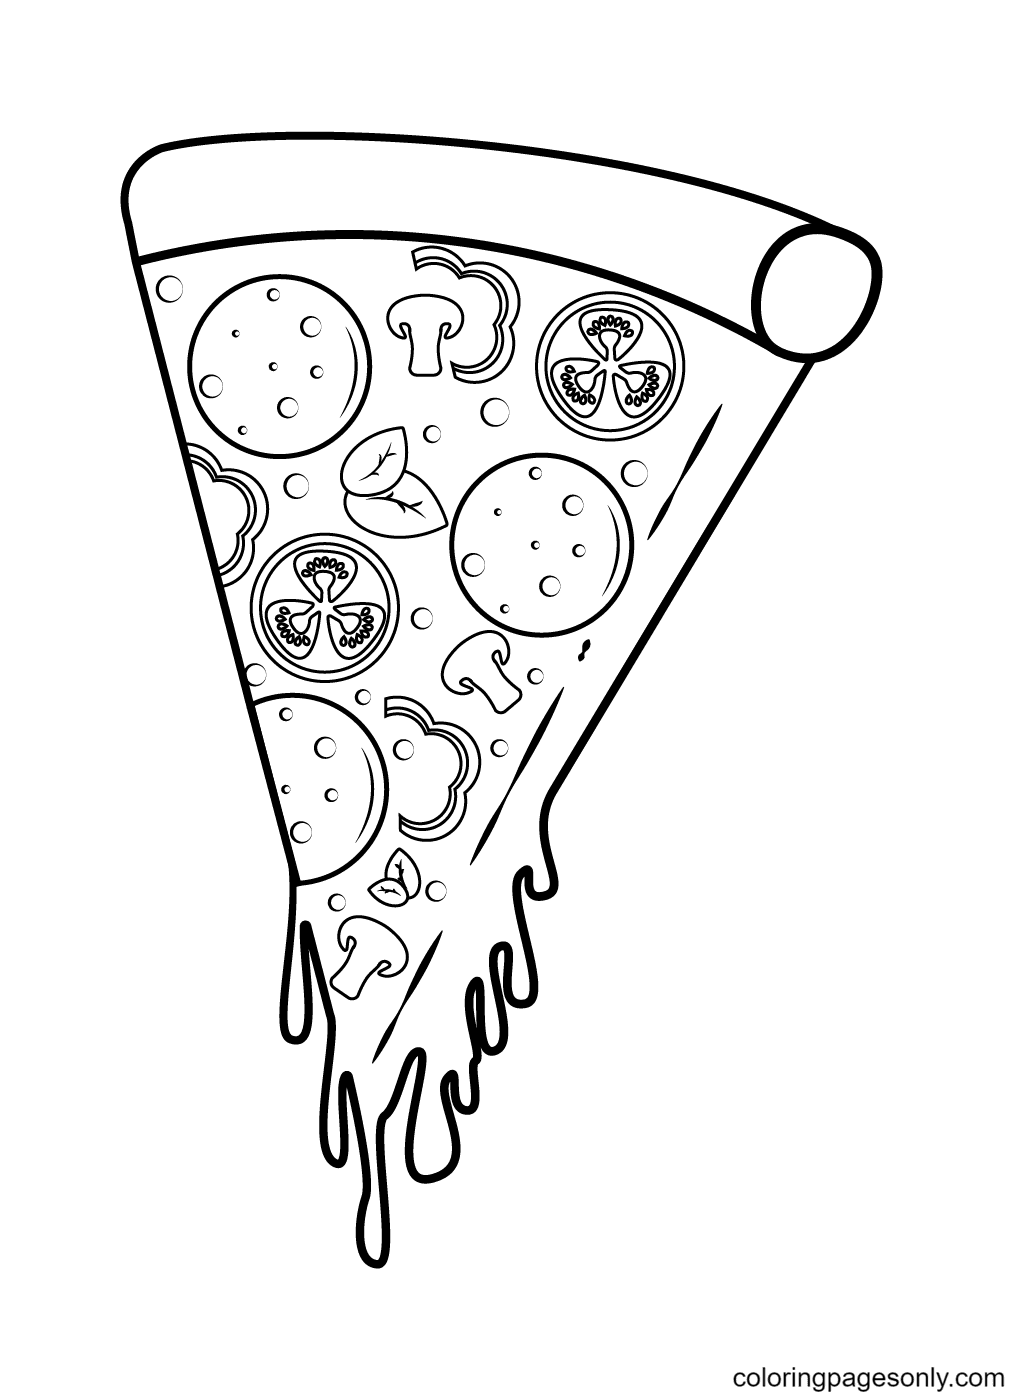 That dripping melted mozzarella cheese so mouth-watering Coloring Page